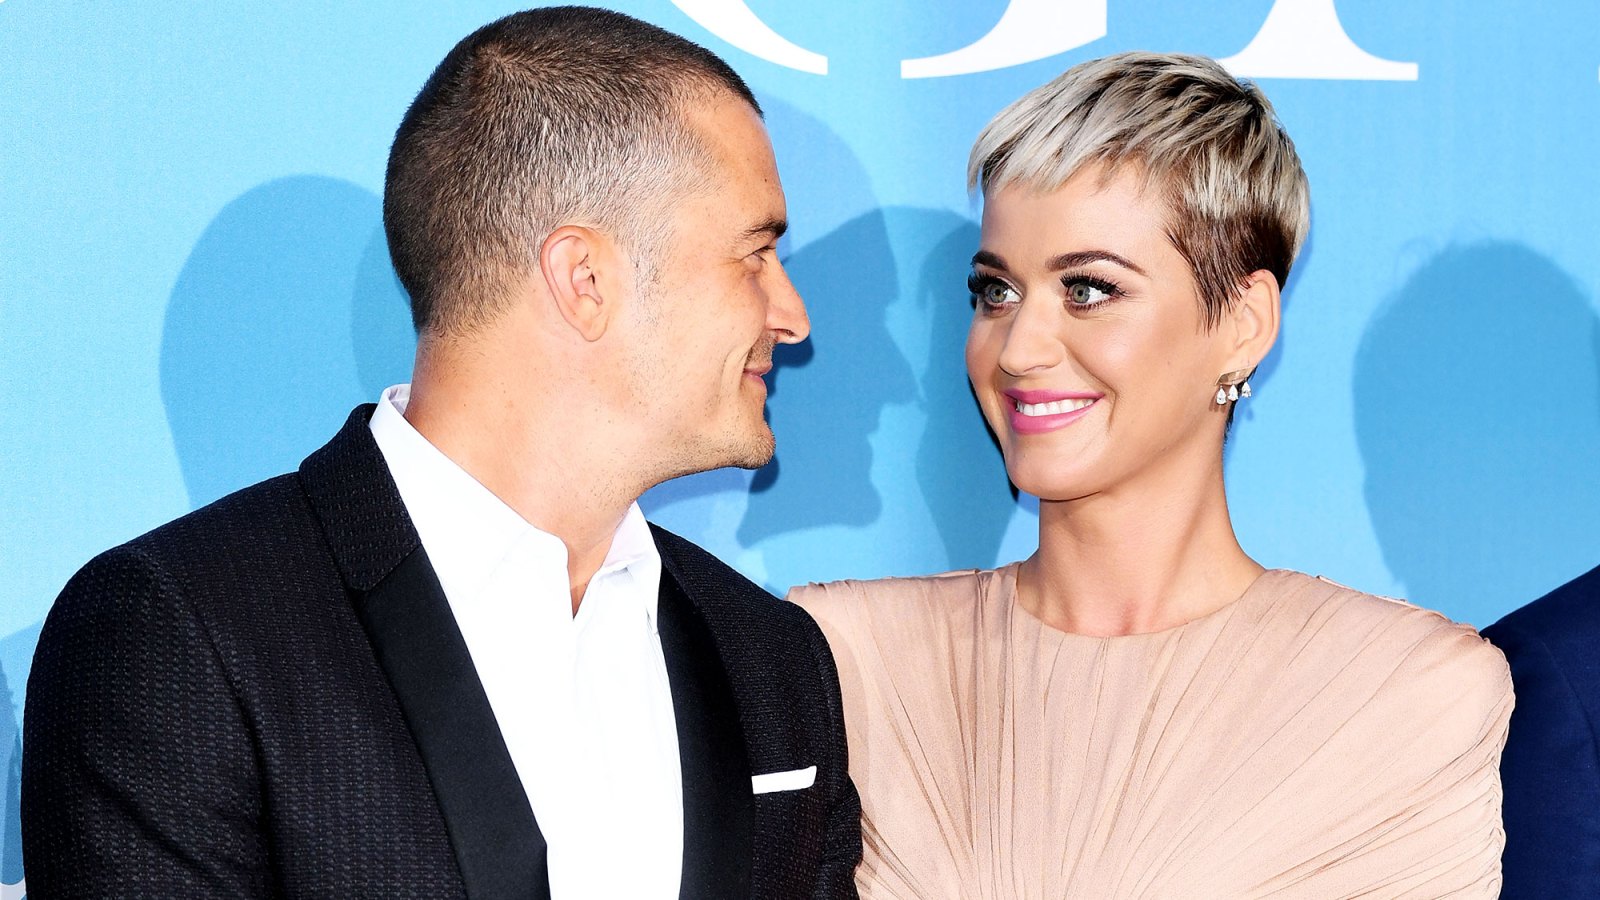 Katy Perry Teases Orlando Bloom About Marrying Her While Watching ‘American Idol’ Together